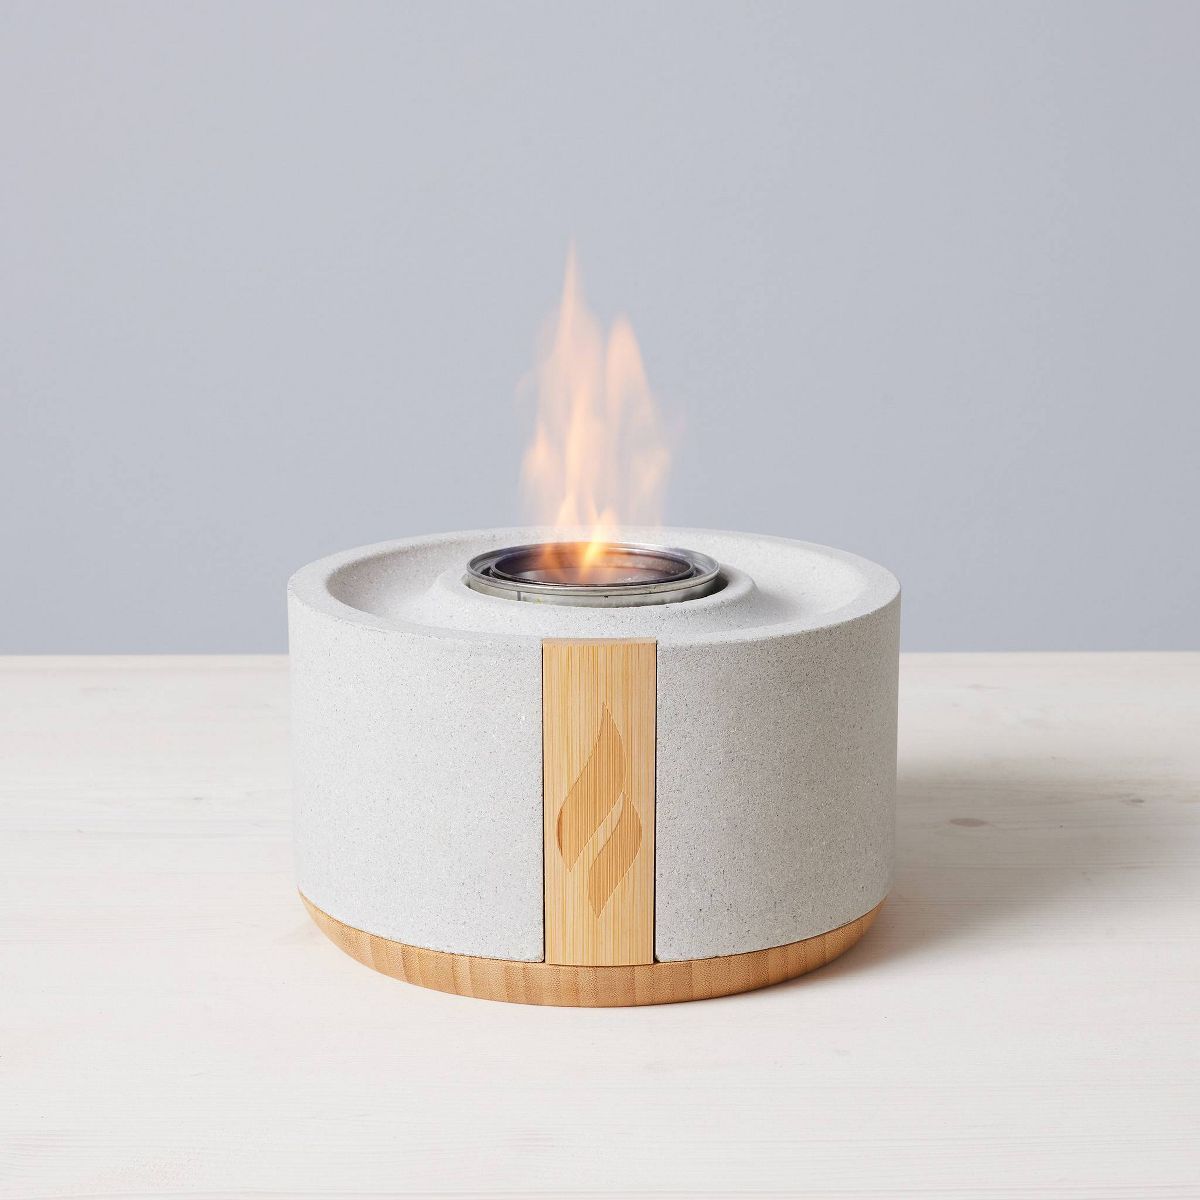 S'mores Roaster Freestanding Fireplace Gray - Solo Stove: Gel Fuel, Concrete Frame, Indoor Use | Target